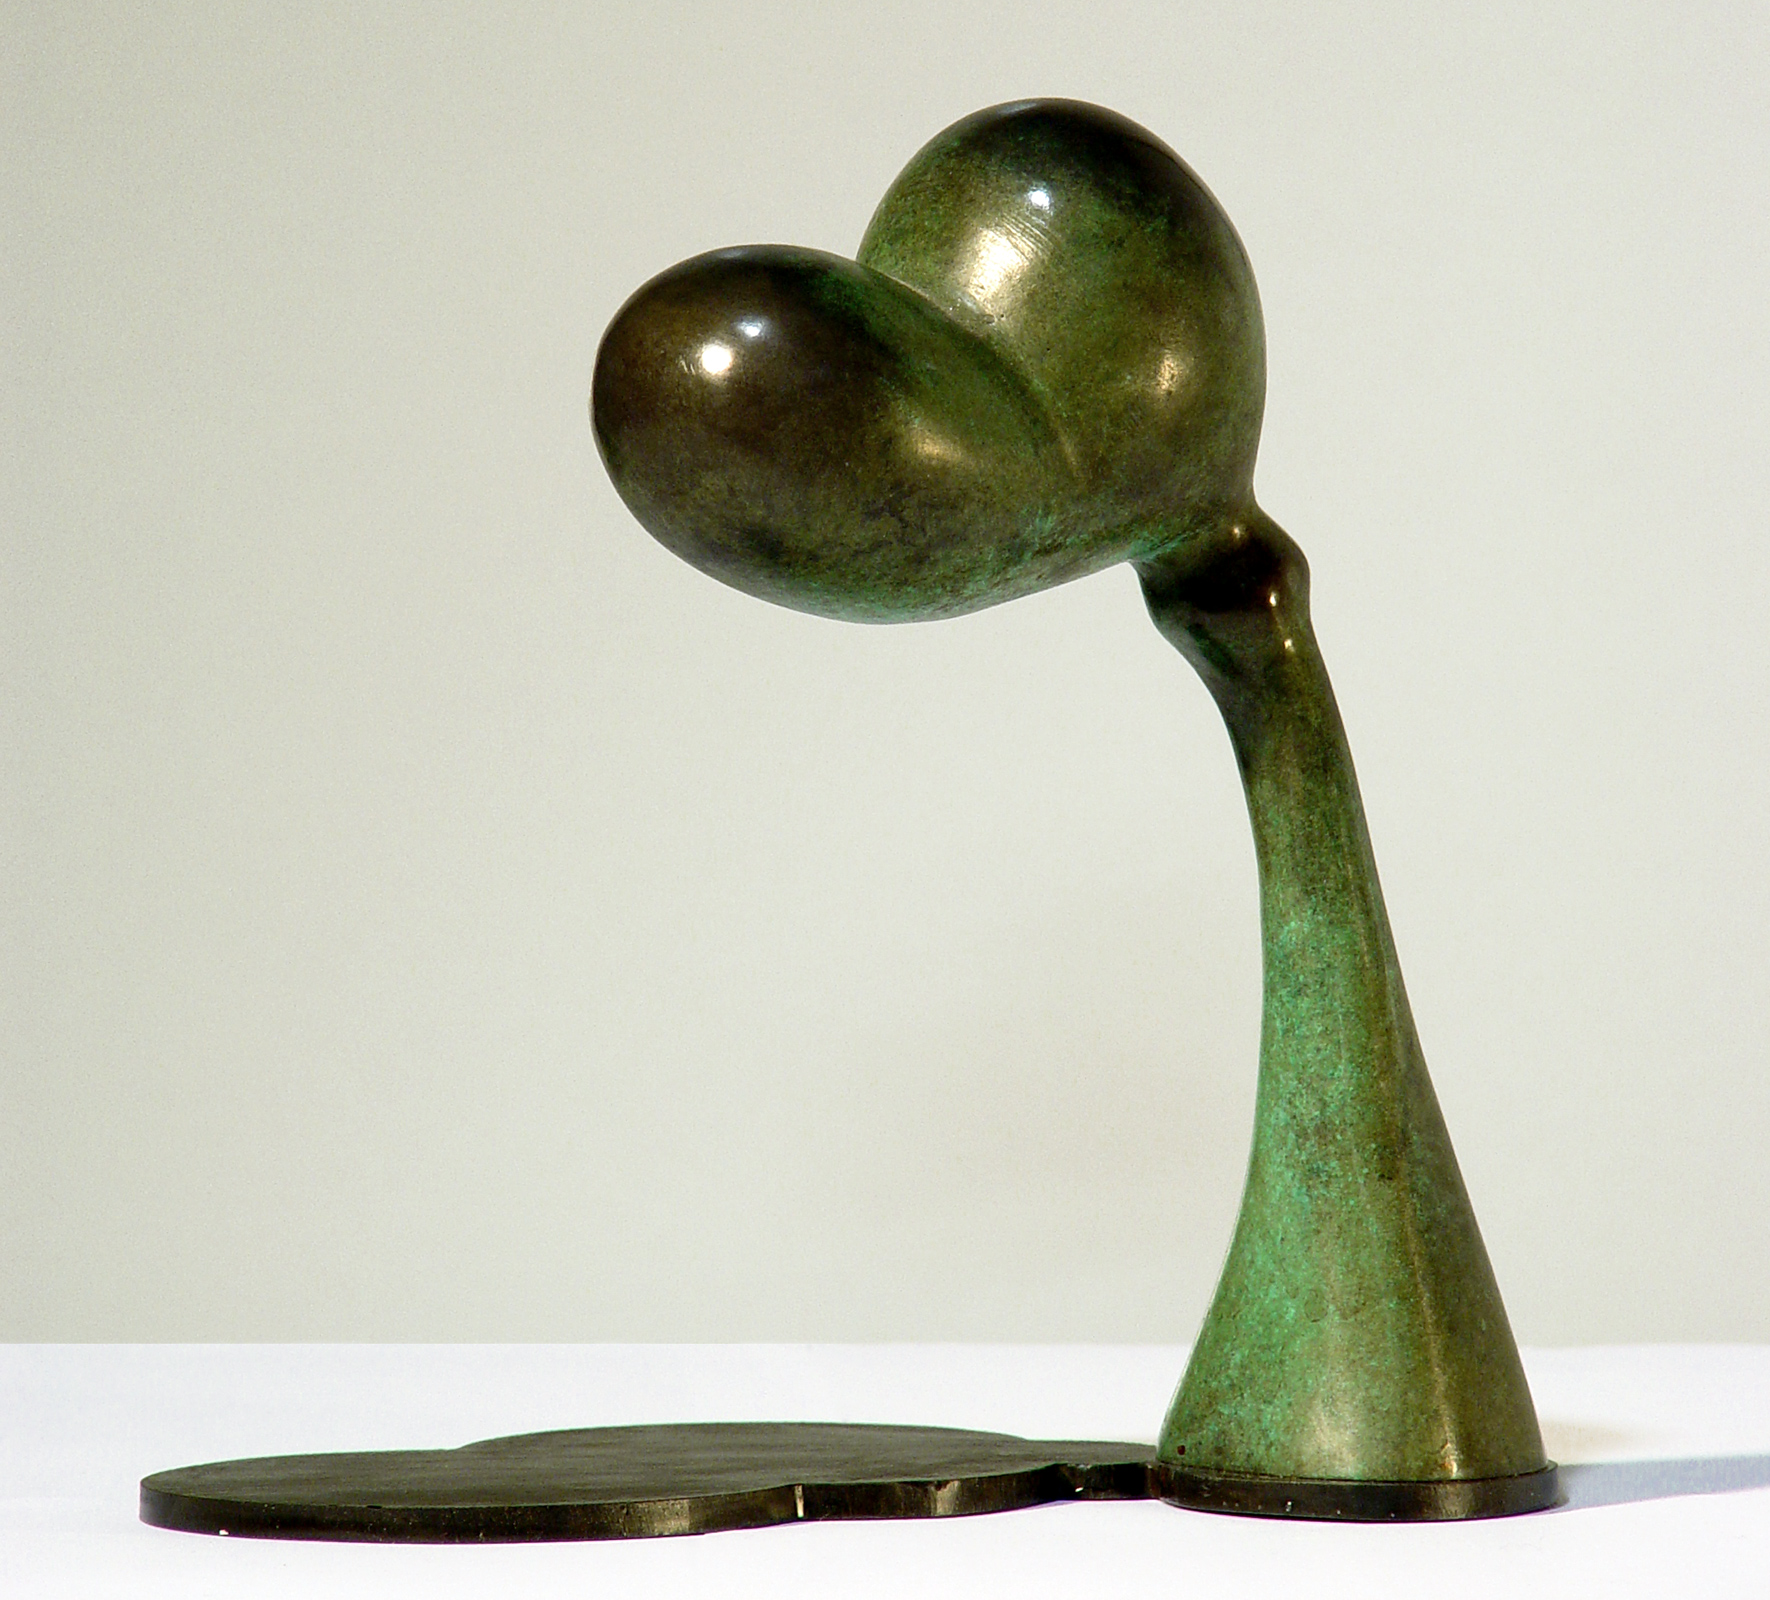 Seed, 2003, sculpture by Adrian Mauriks.